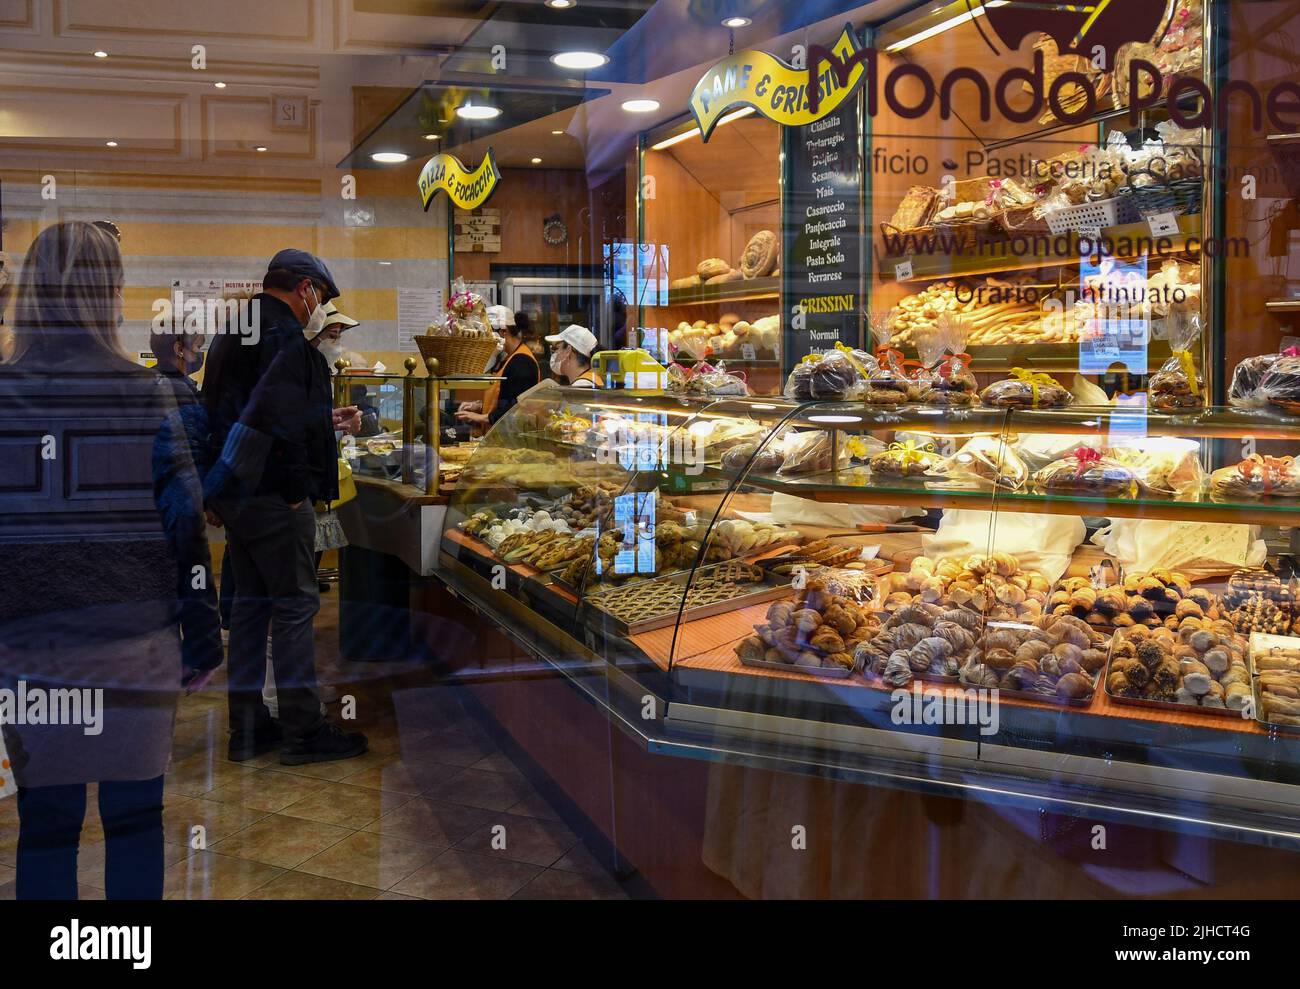 A typical bakery-pastry shop in the historic centre of Rapallo, Genoa, Liguria, Italy Stock Photo